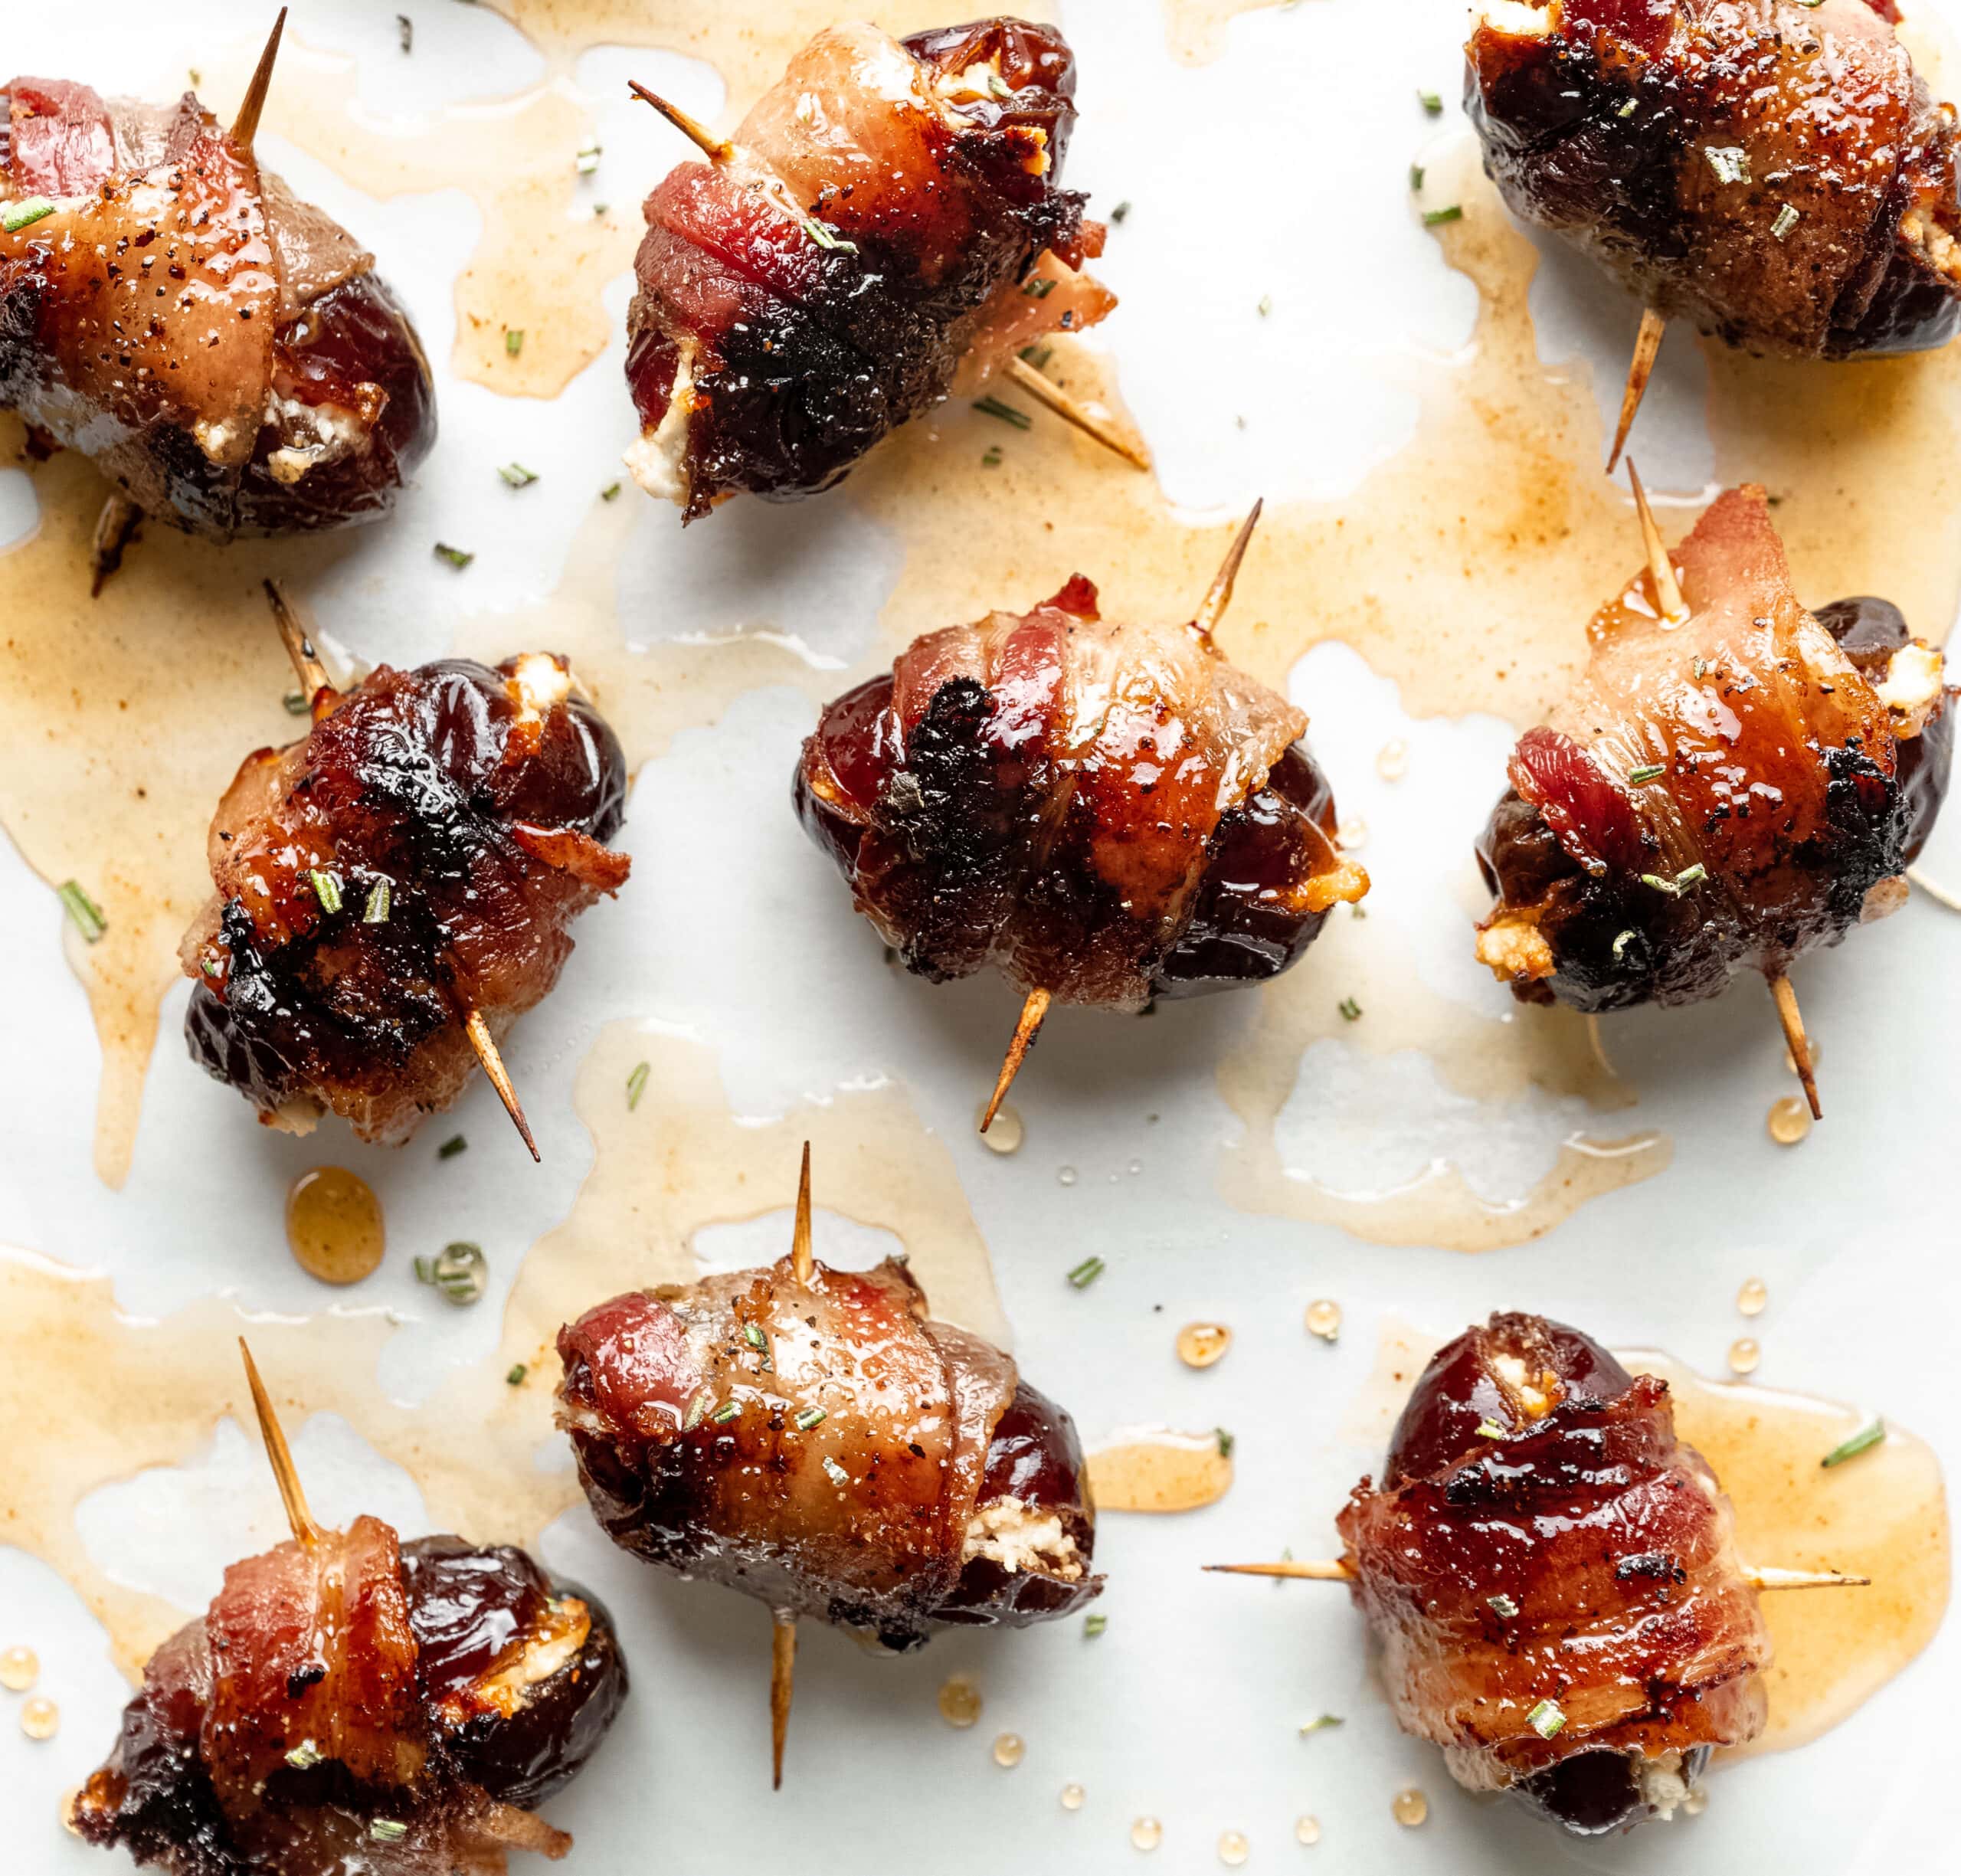 Picture of bacon wrapped dates stuffed with goat cheese and drizzles with honey.